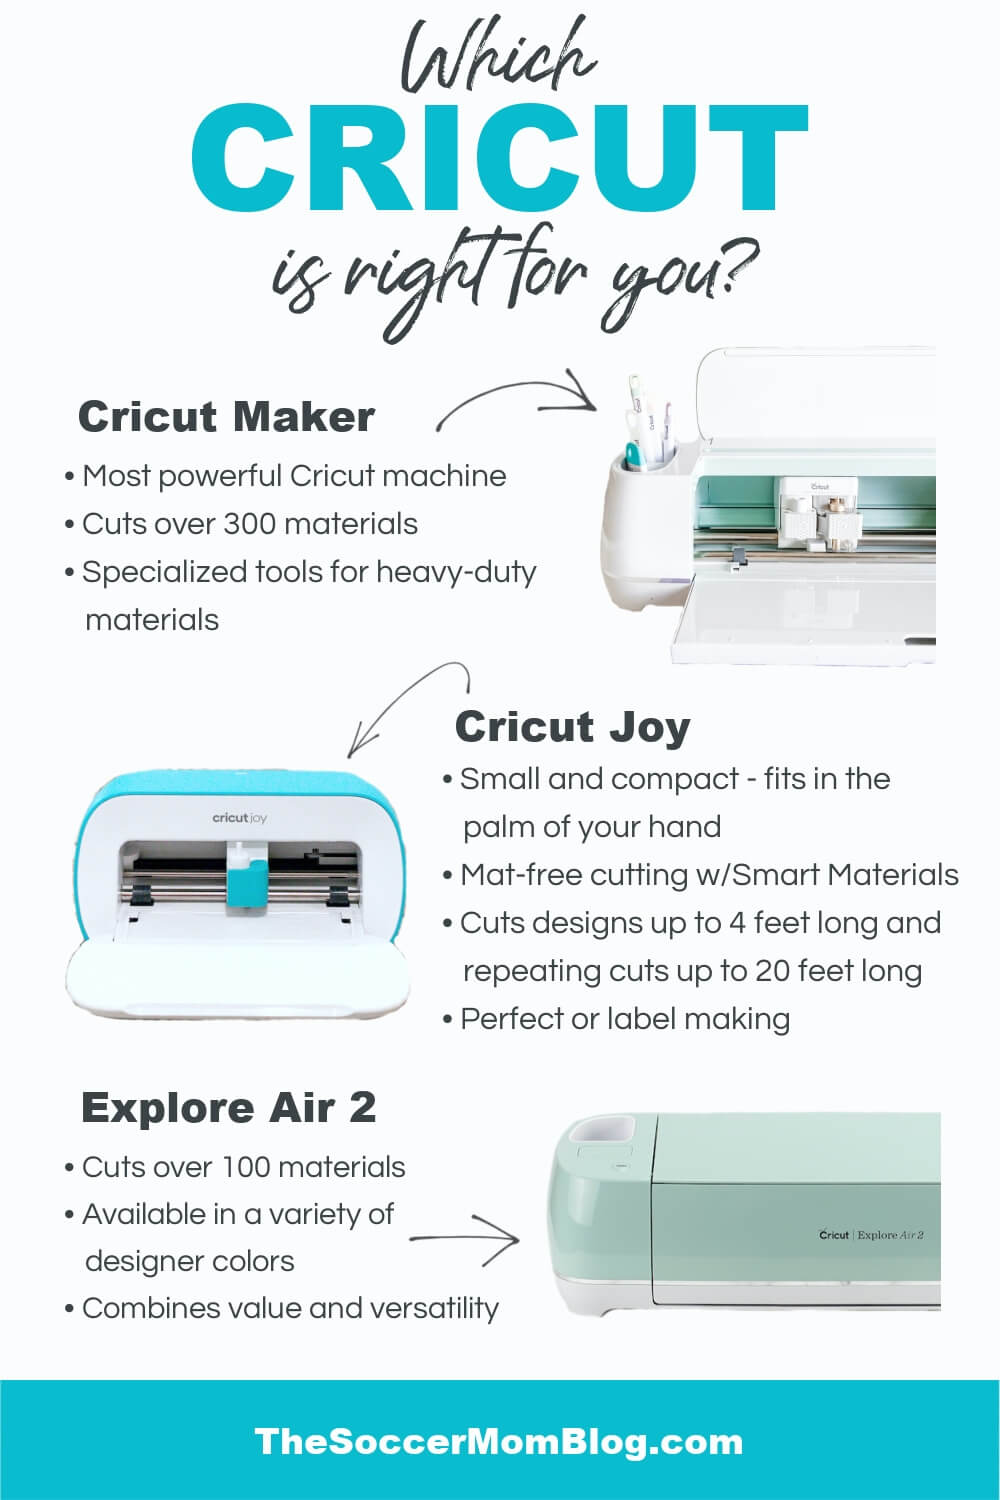 New and used Cricut Smart Cutting Machines for sale